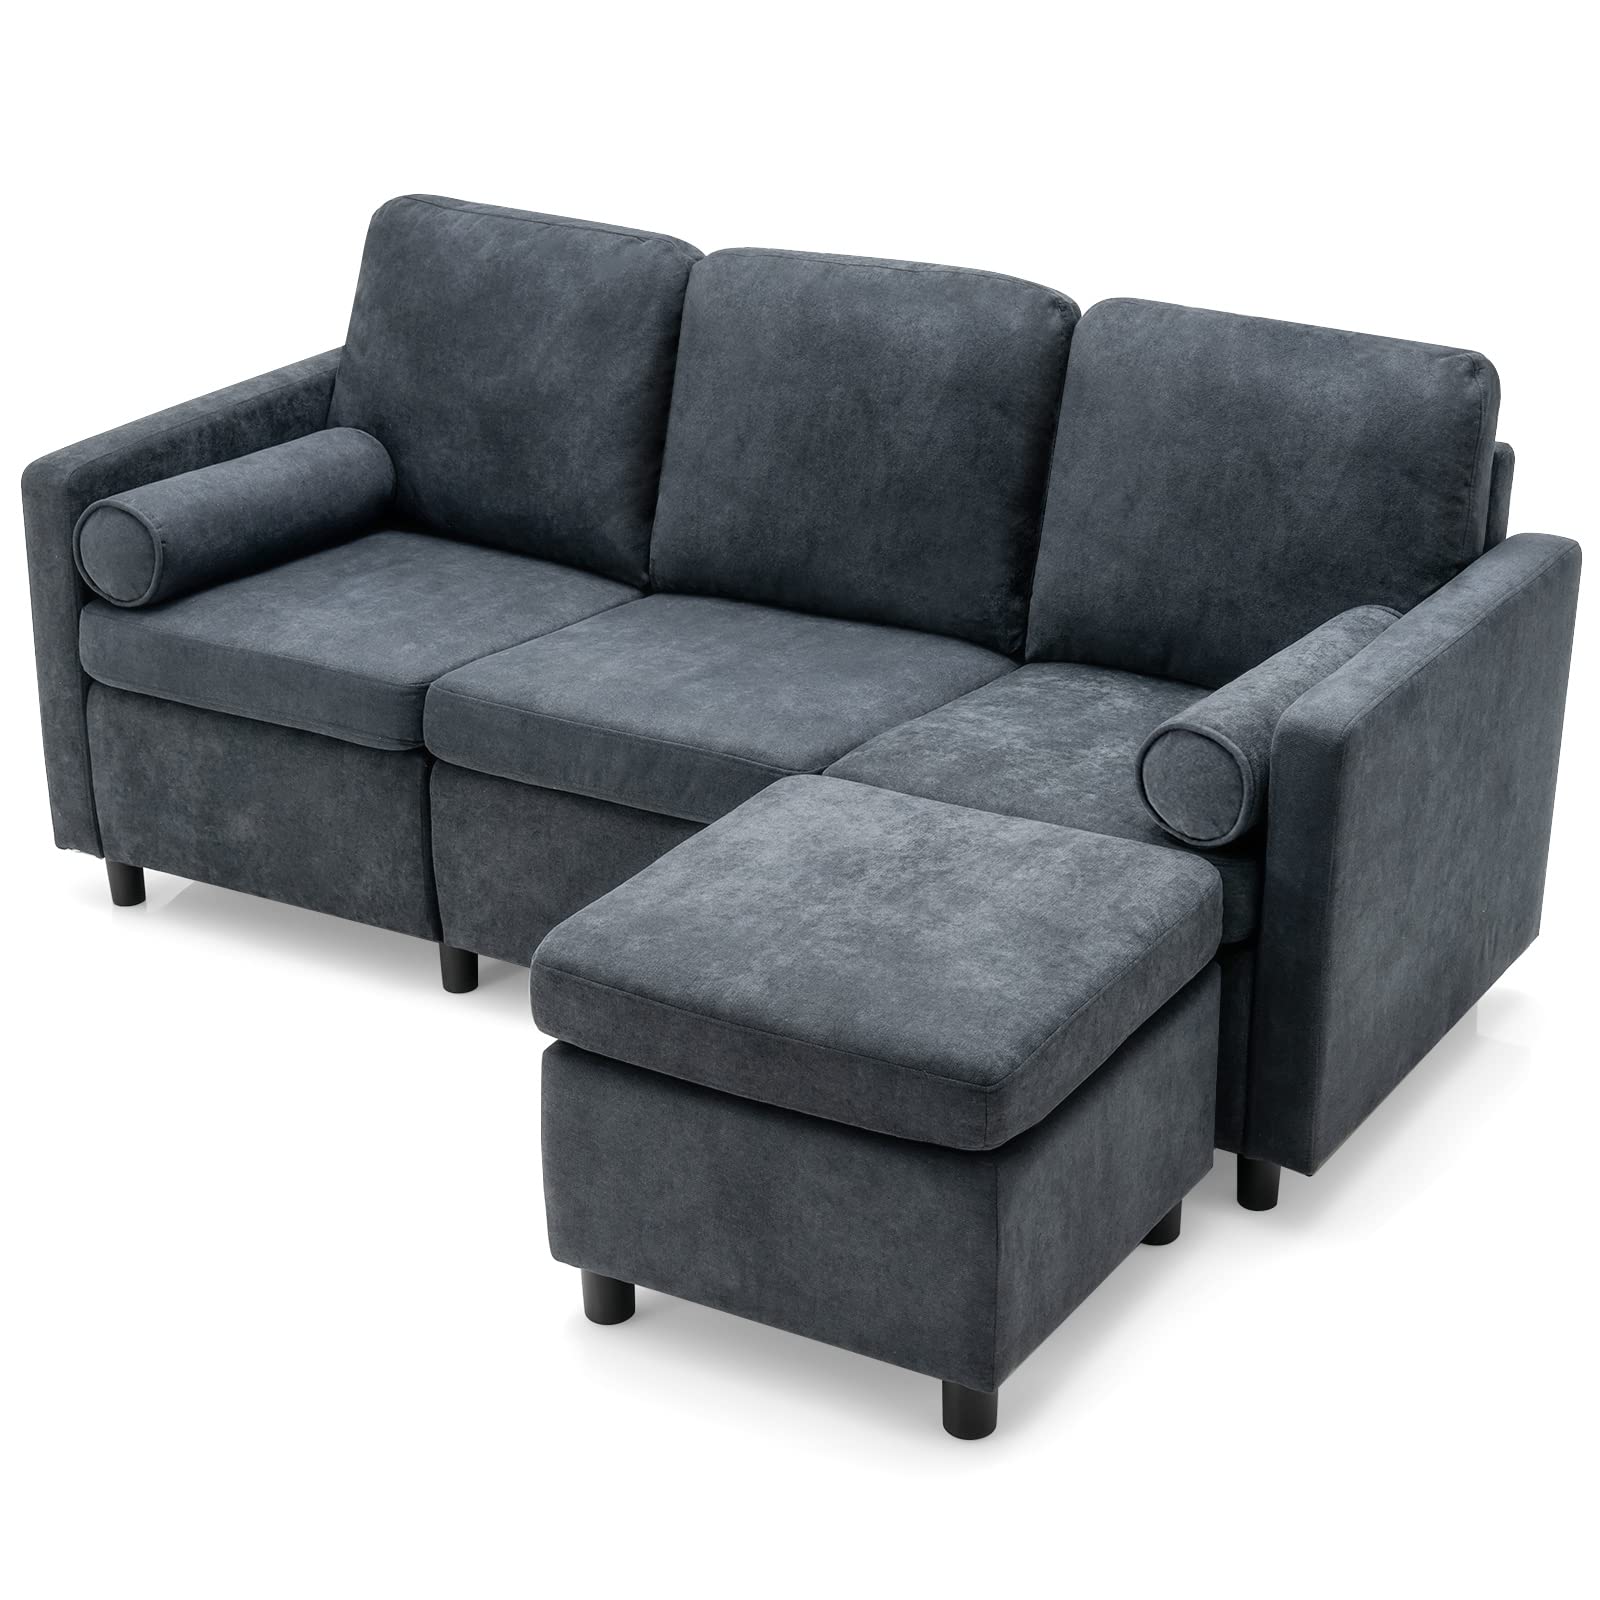 Giantex Sectional Sofa Set, Convertible L-Shaped Couch with Ottoman, 73" x 31.5" x 34" (Grey)